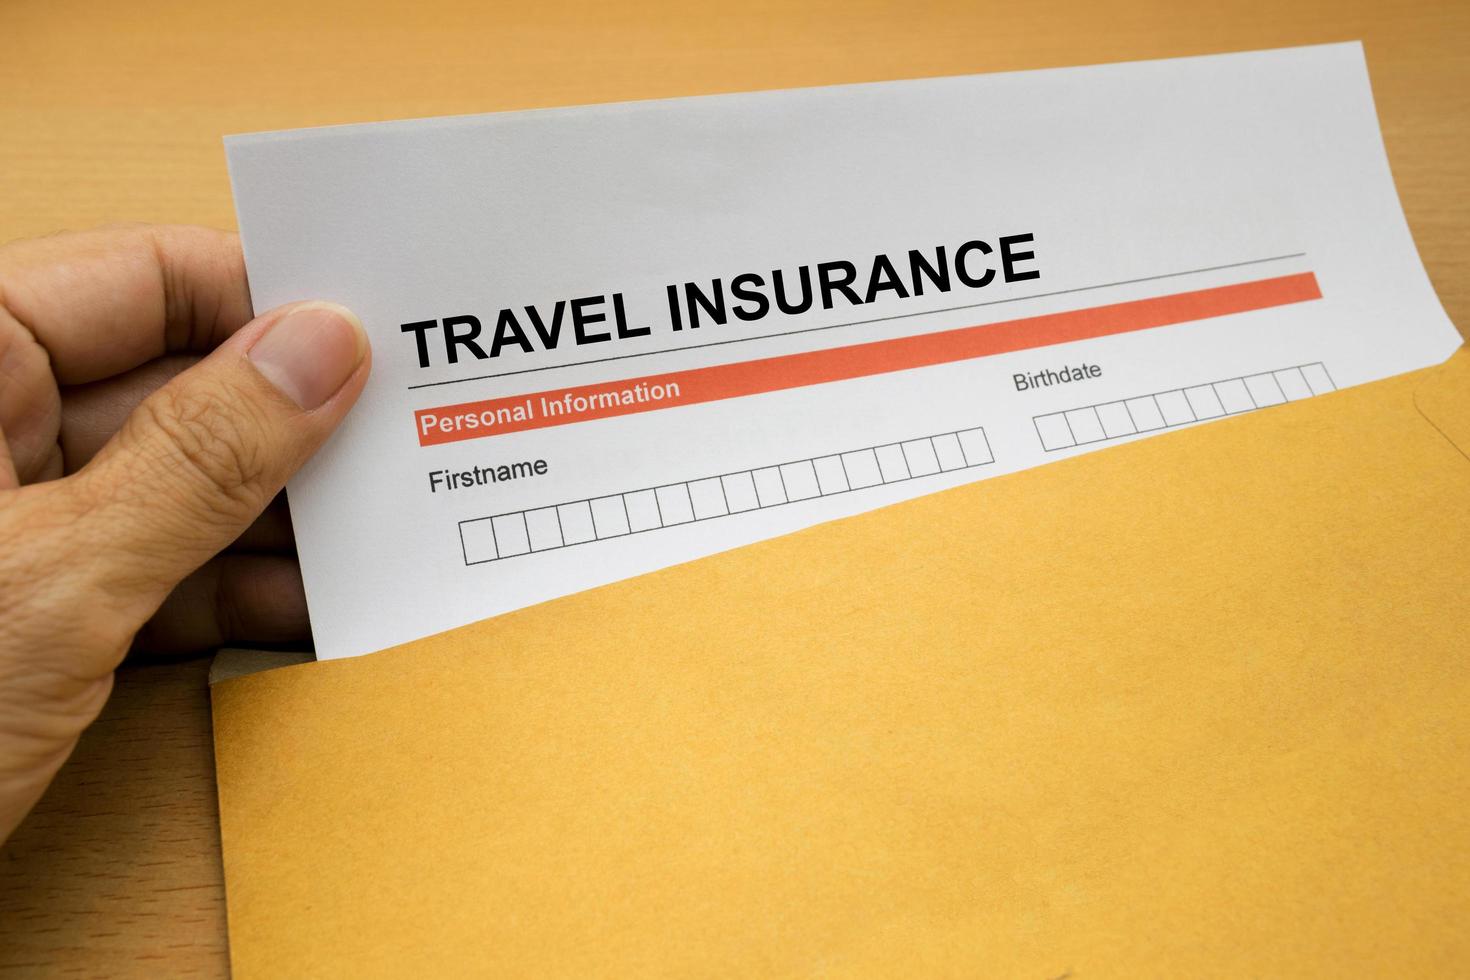 travel Insurance application form on brown envelope photo